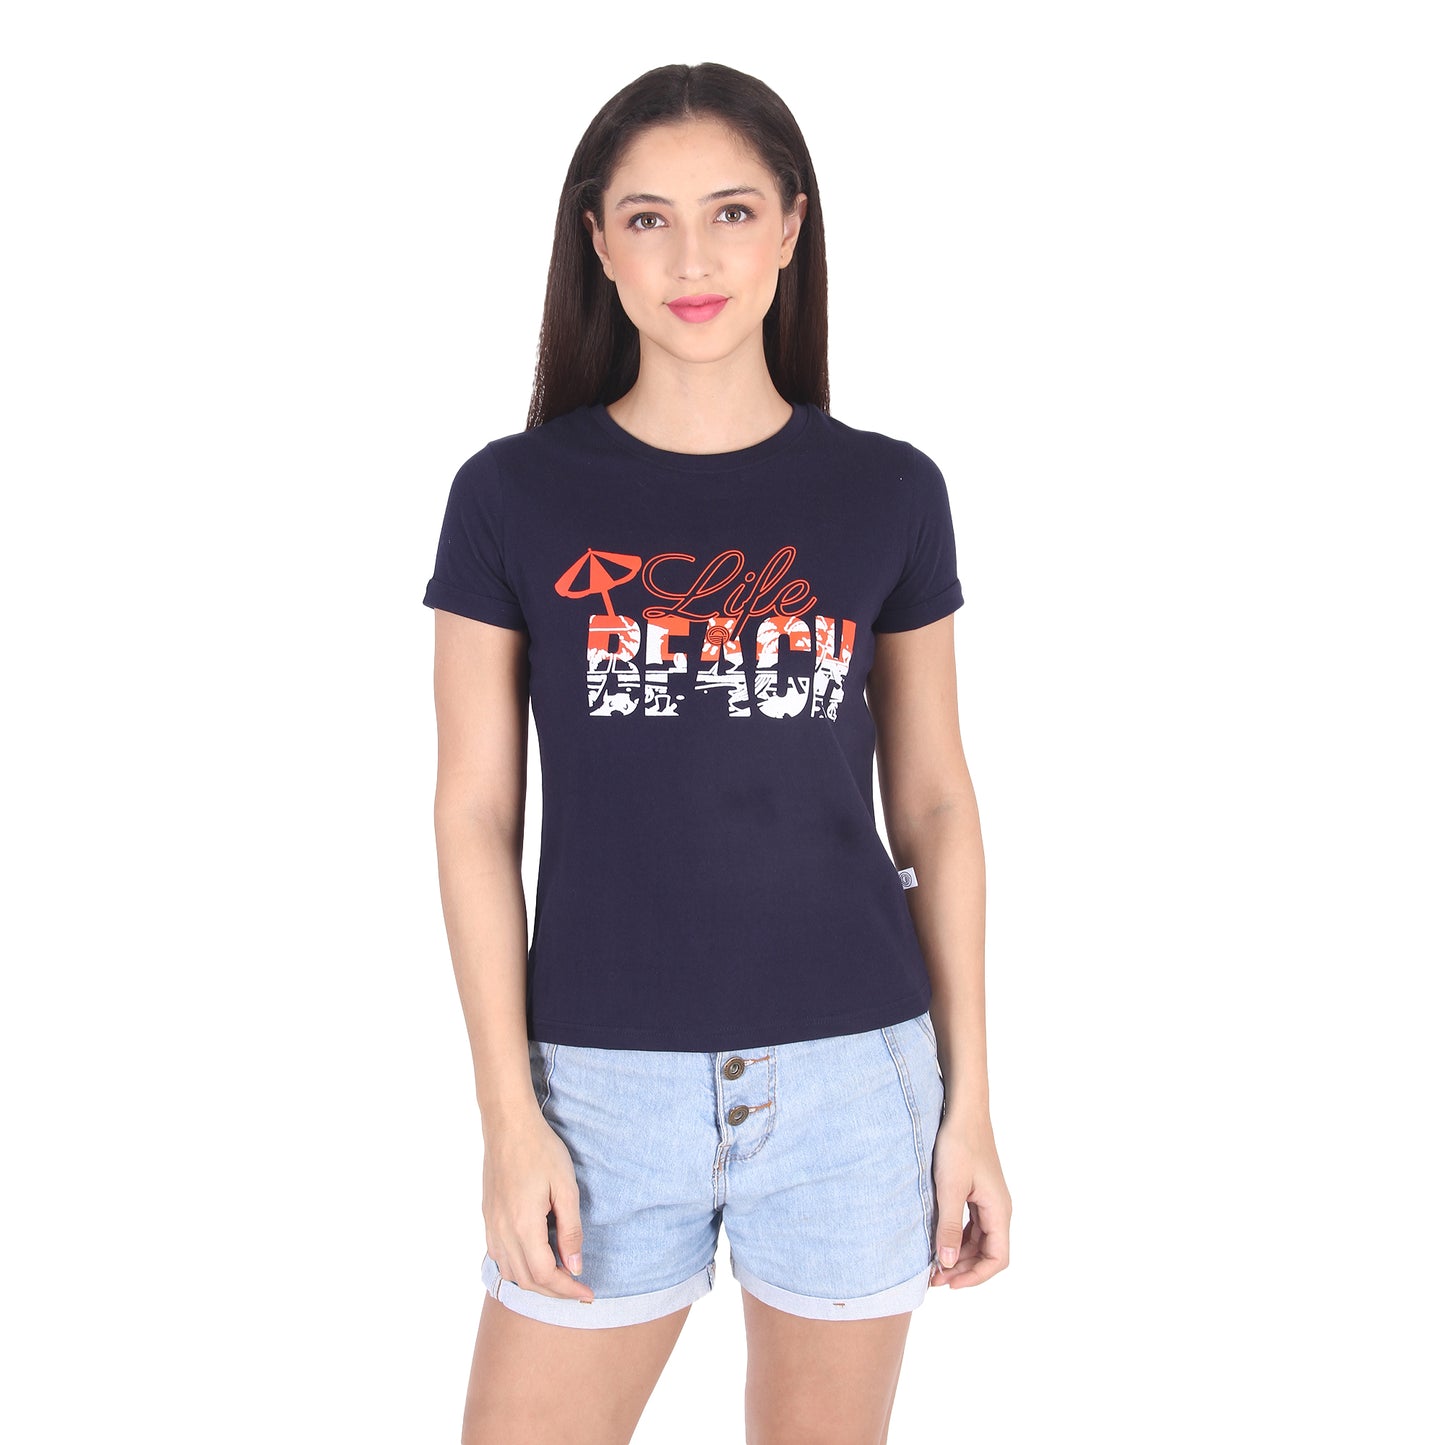 printed t-shirts for women